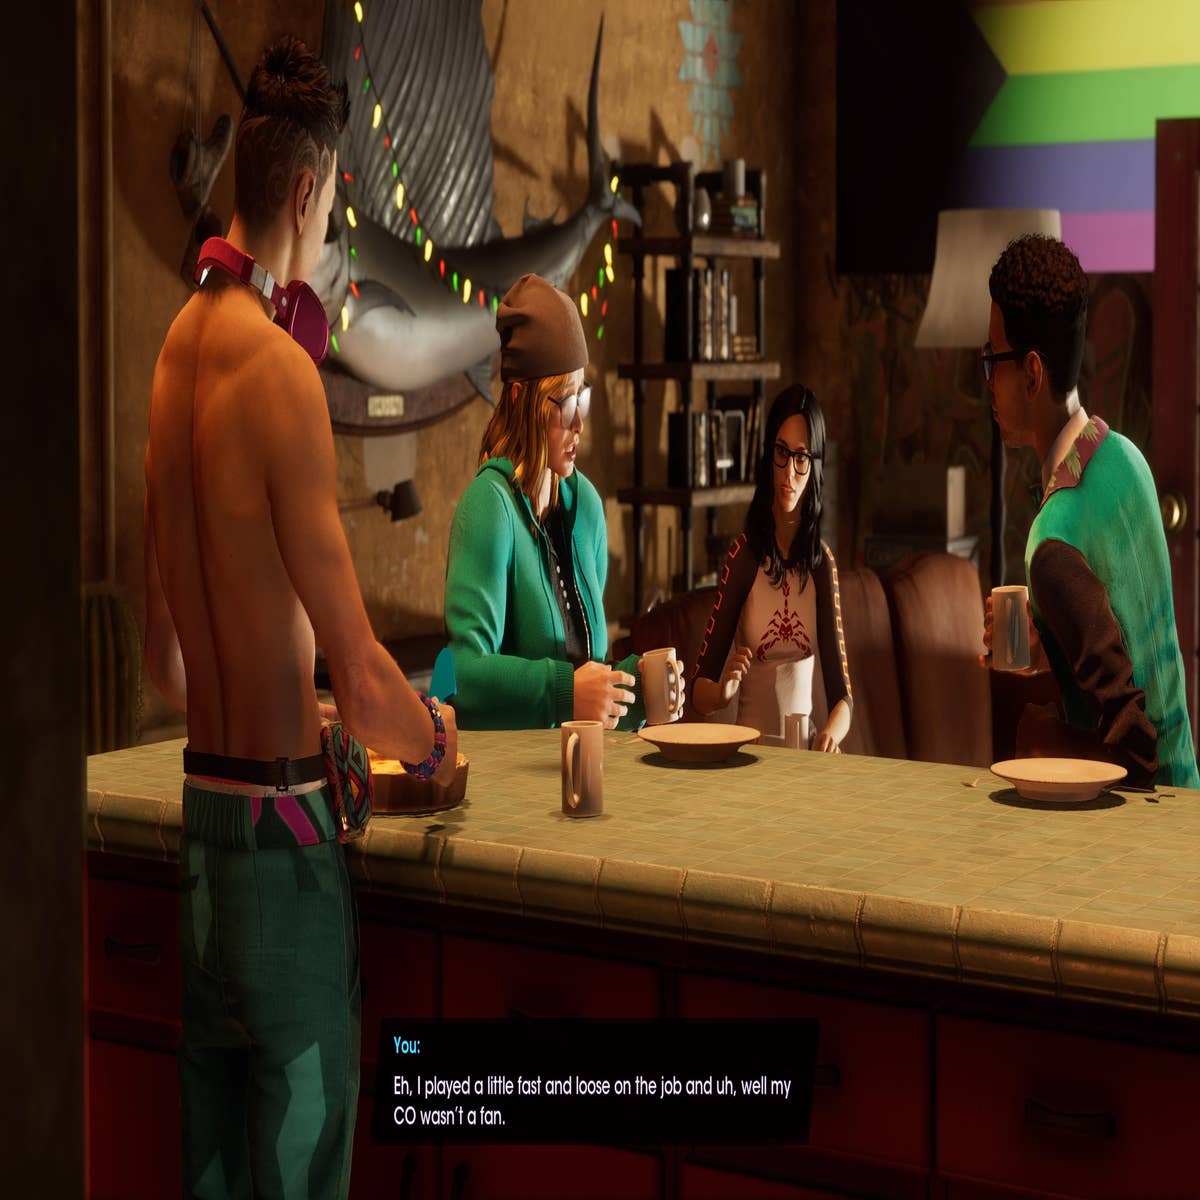 Saints Row developer video shows a bit of gameplay from the reboot